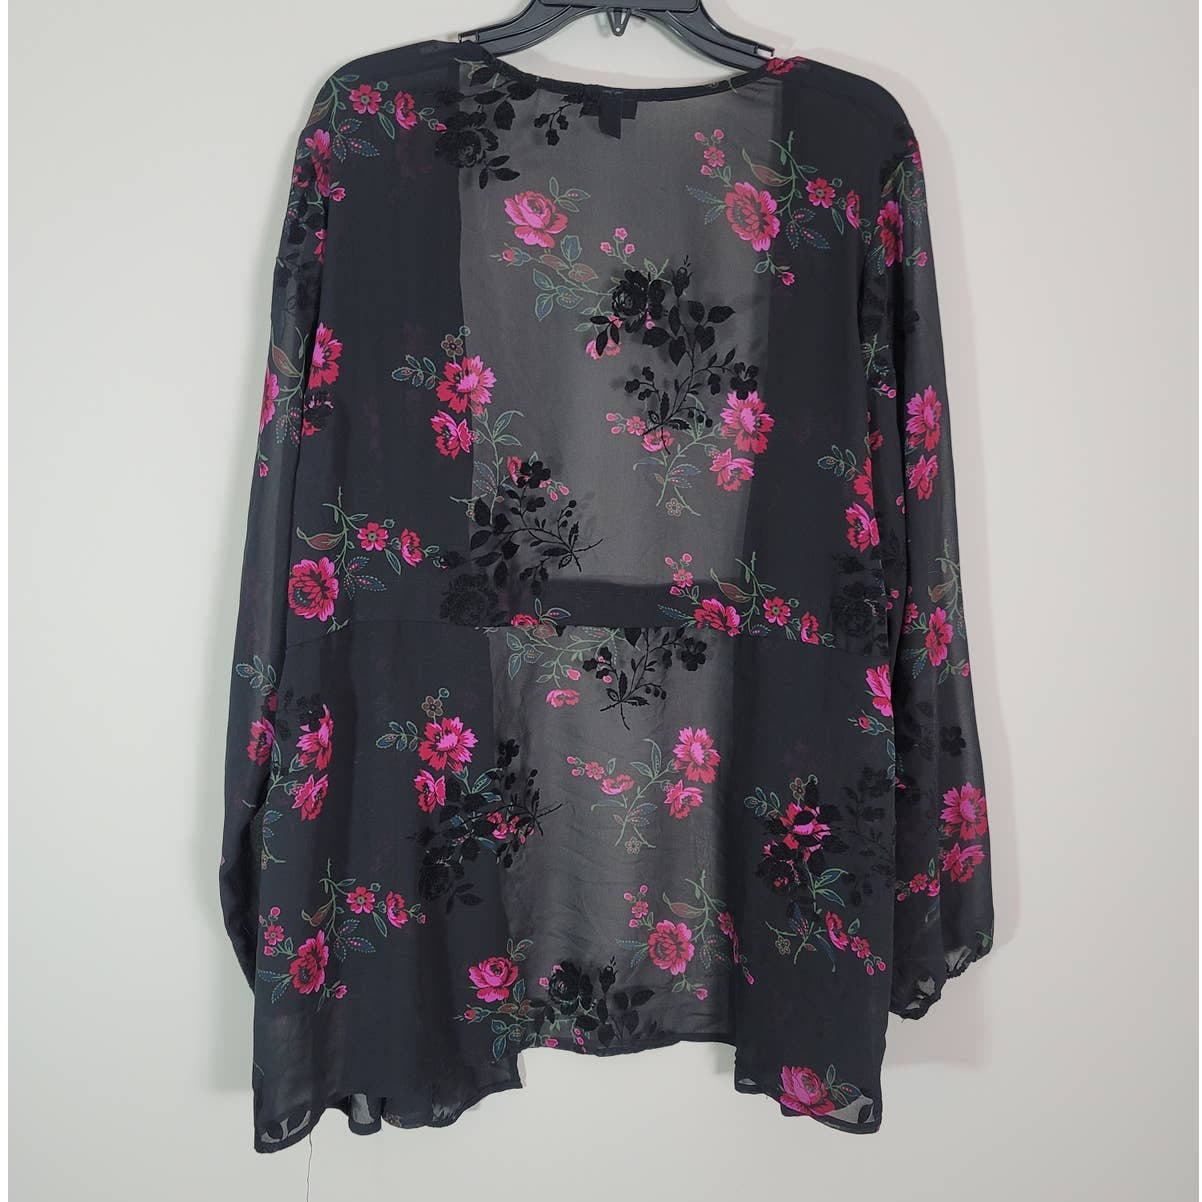 Torrid Tie Front Blouse Chiffon Black Floral Sheer Long Sleeve Size 2/2X